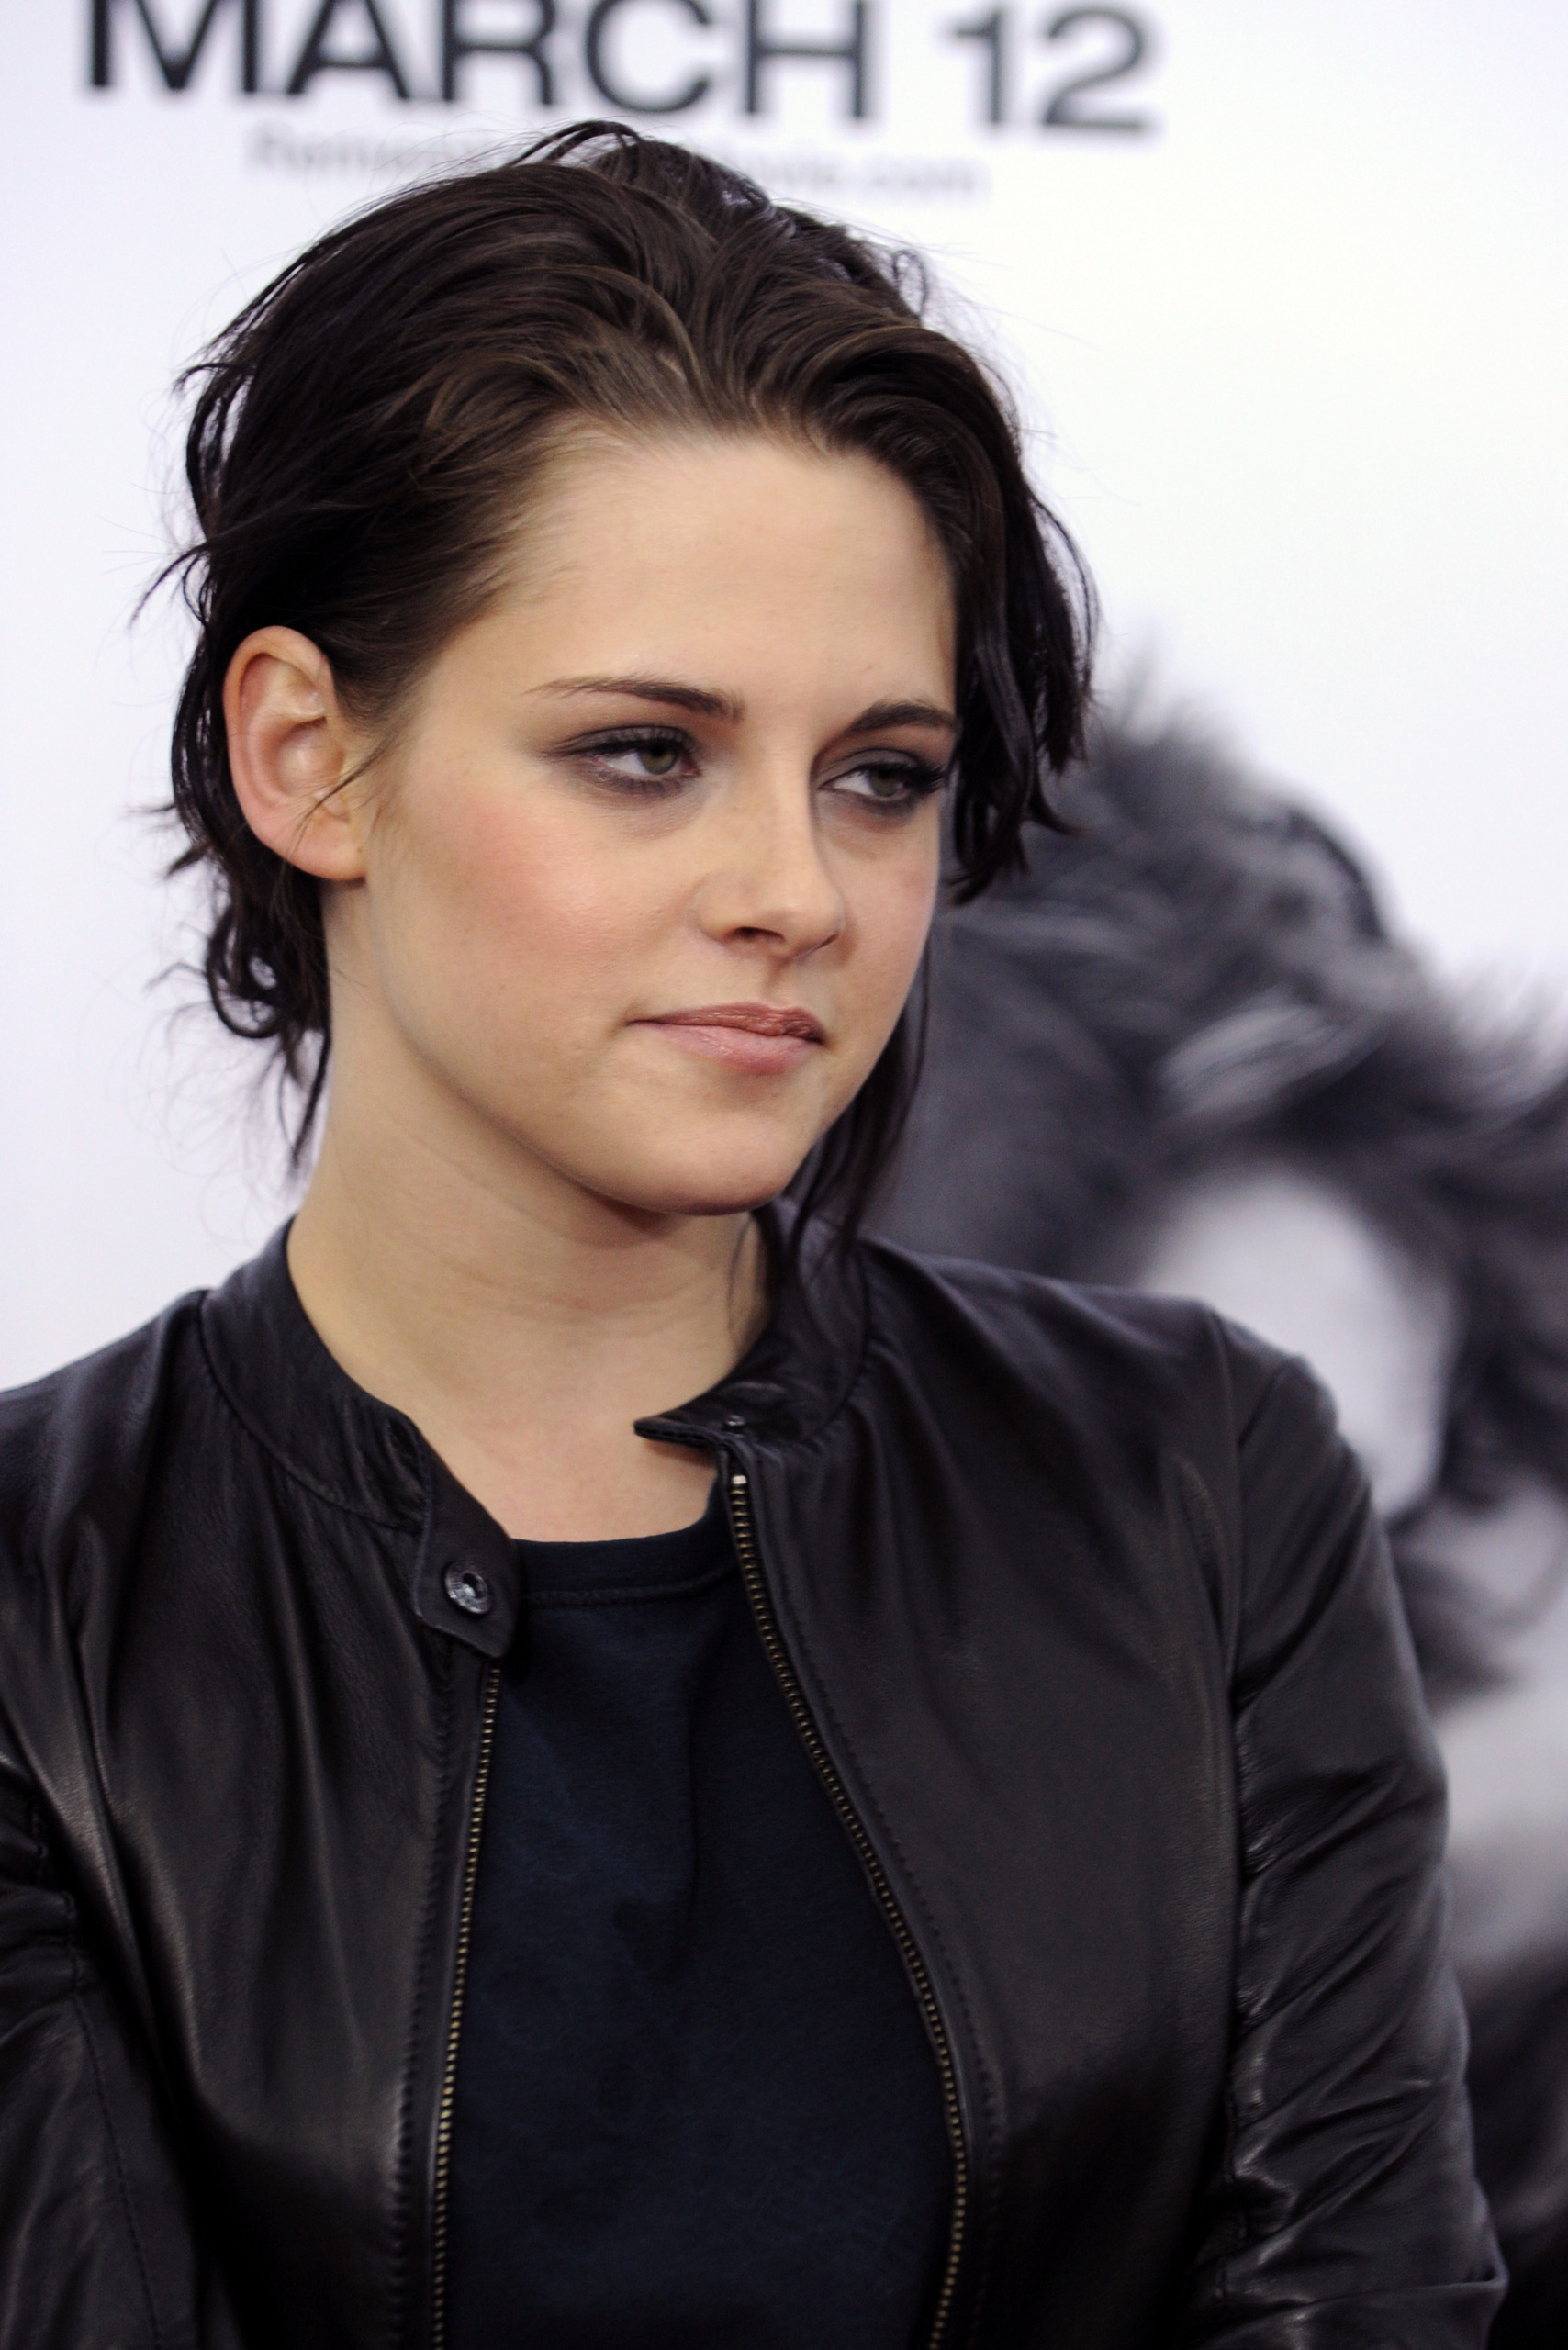 Kristen Stewart Hairstyles Hair Cuts and Colors